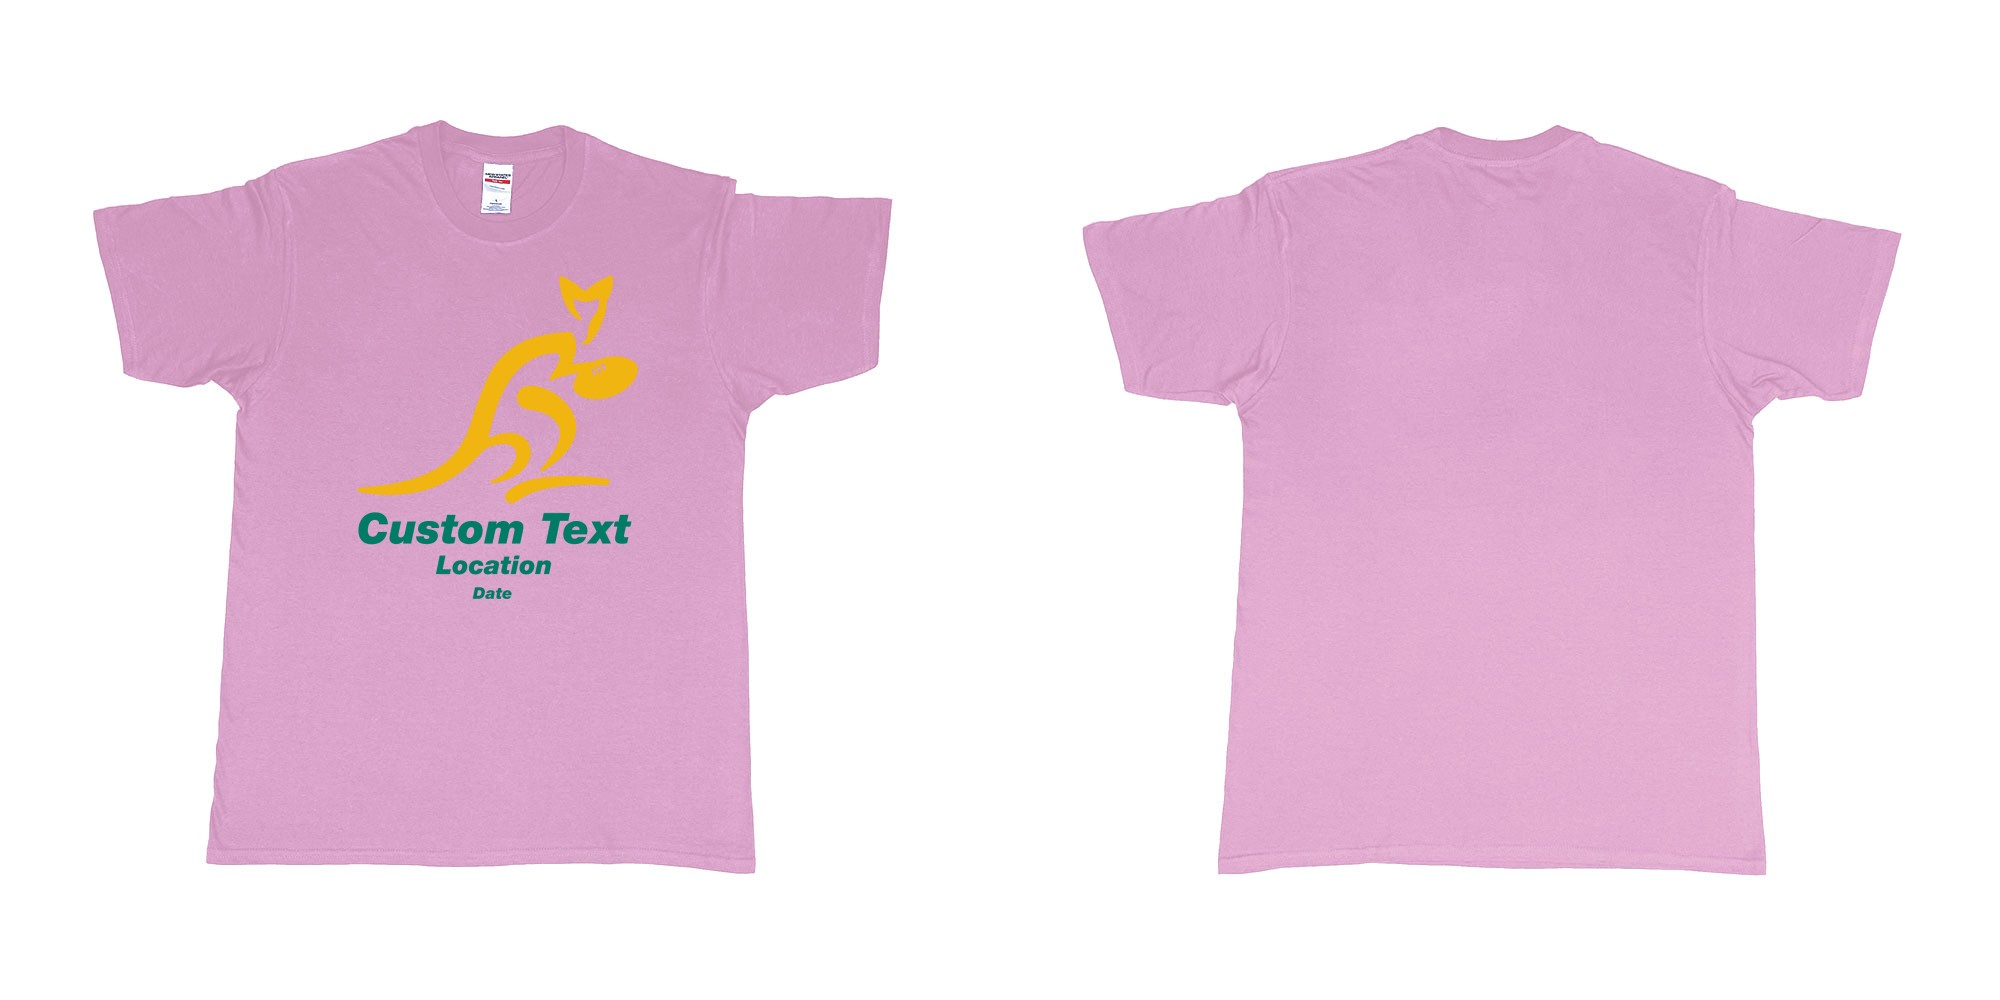 Custom tshirt design australia national rugby union team the wallabies in fabric color light-pink choice your own text made in Bali by The Pirate Way